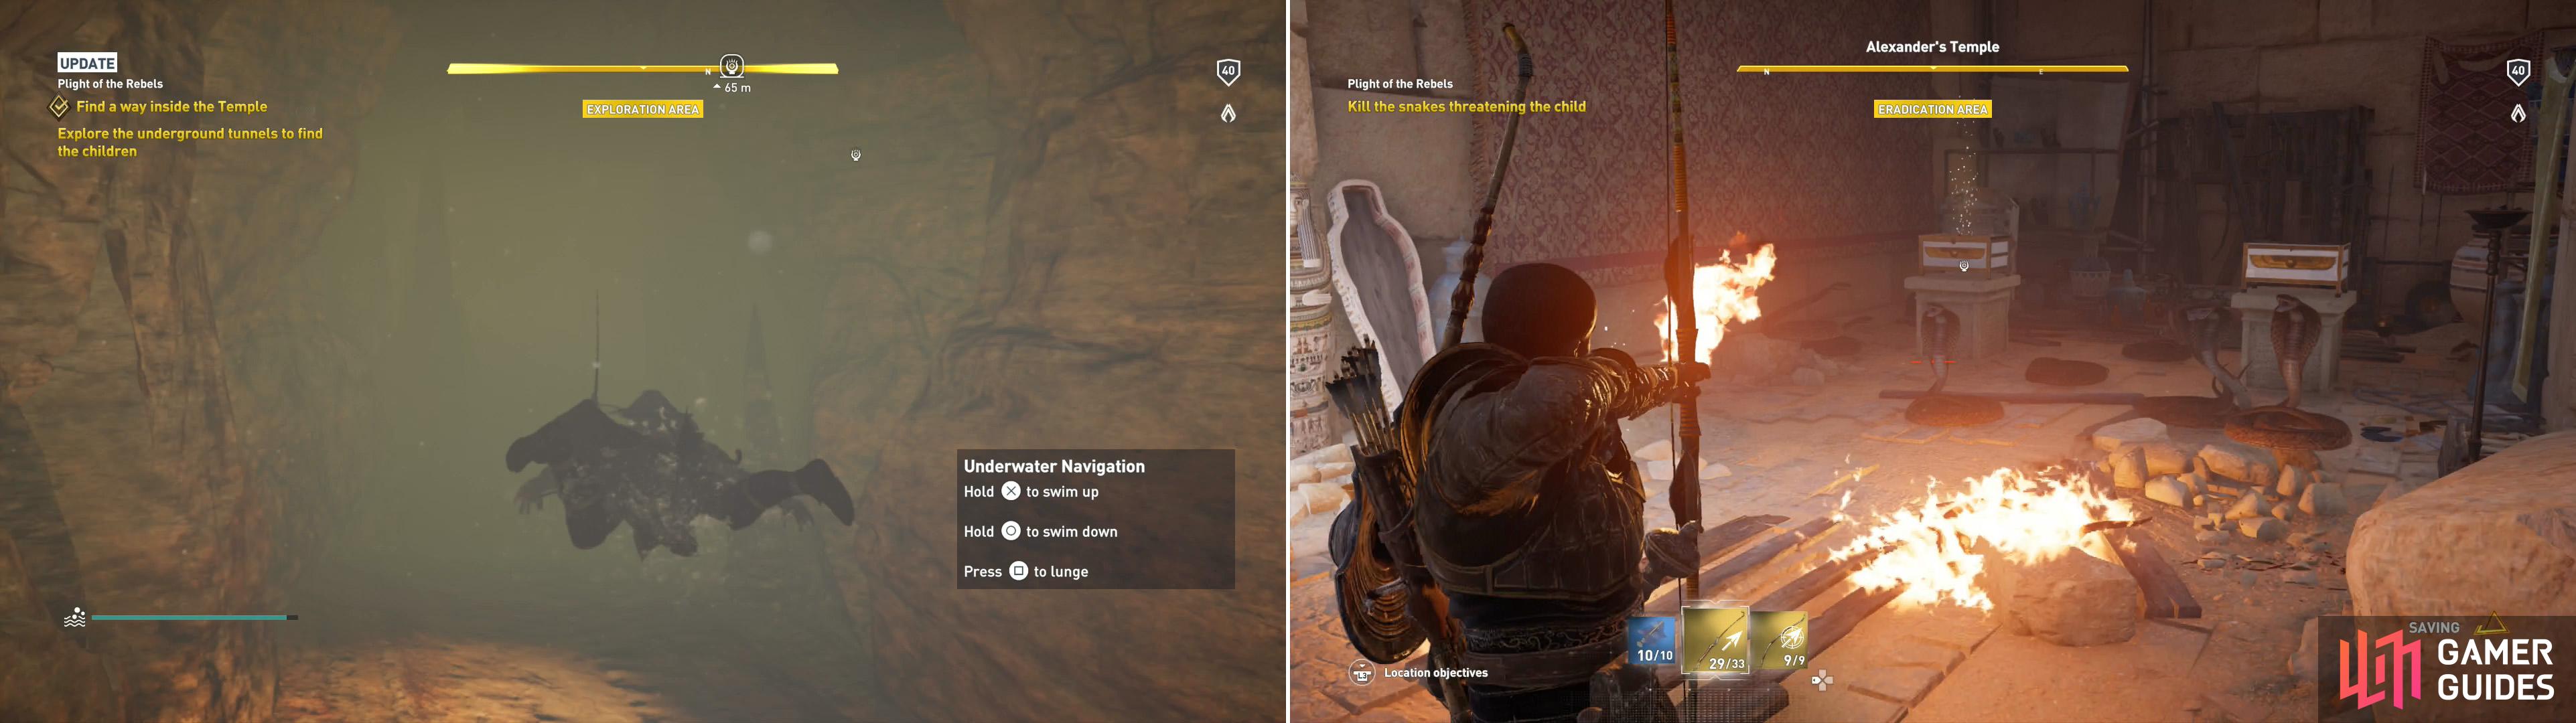 Swim through a submerged tunnel (left) then kill the cobras in Alexander's Temple (right).